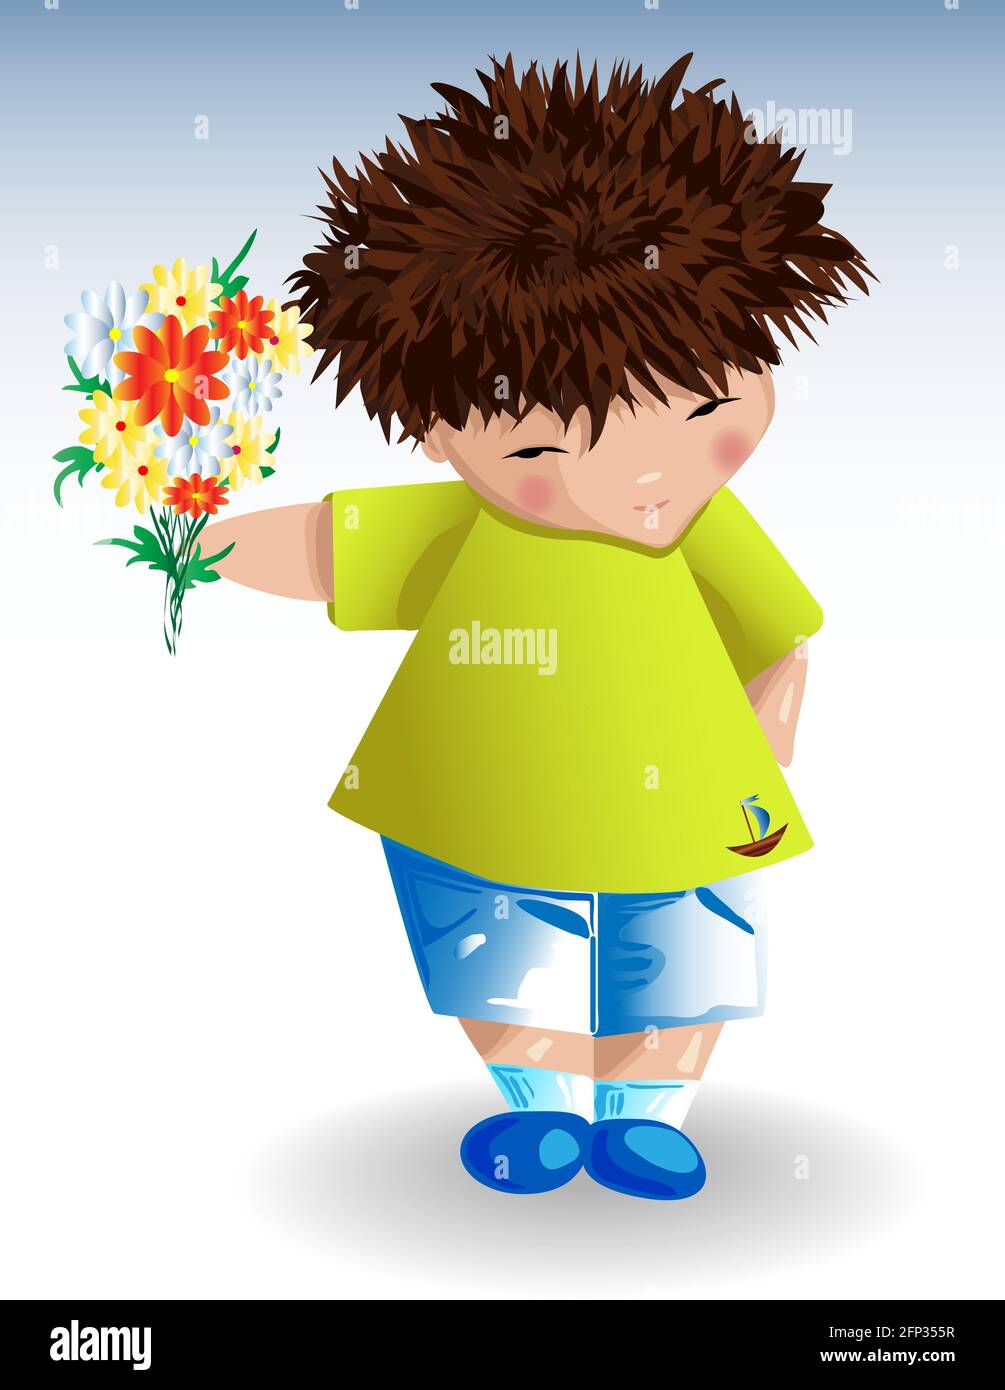 A boy in a green T-shirt with a painted anchor, blue shorts on a light background with a bouquet of flowers in his hand. Recreation, marine subjects, Stock Vector